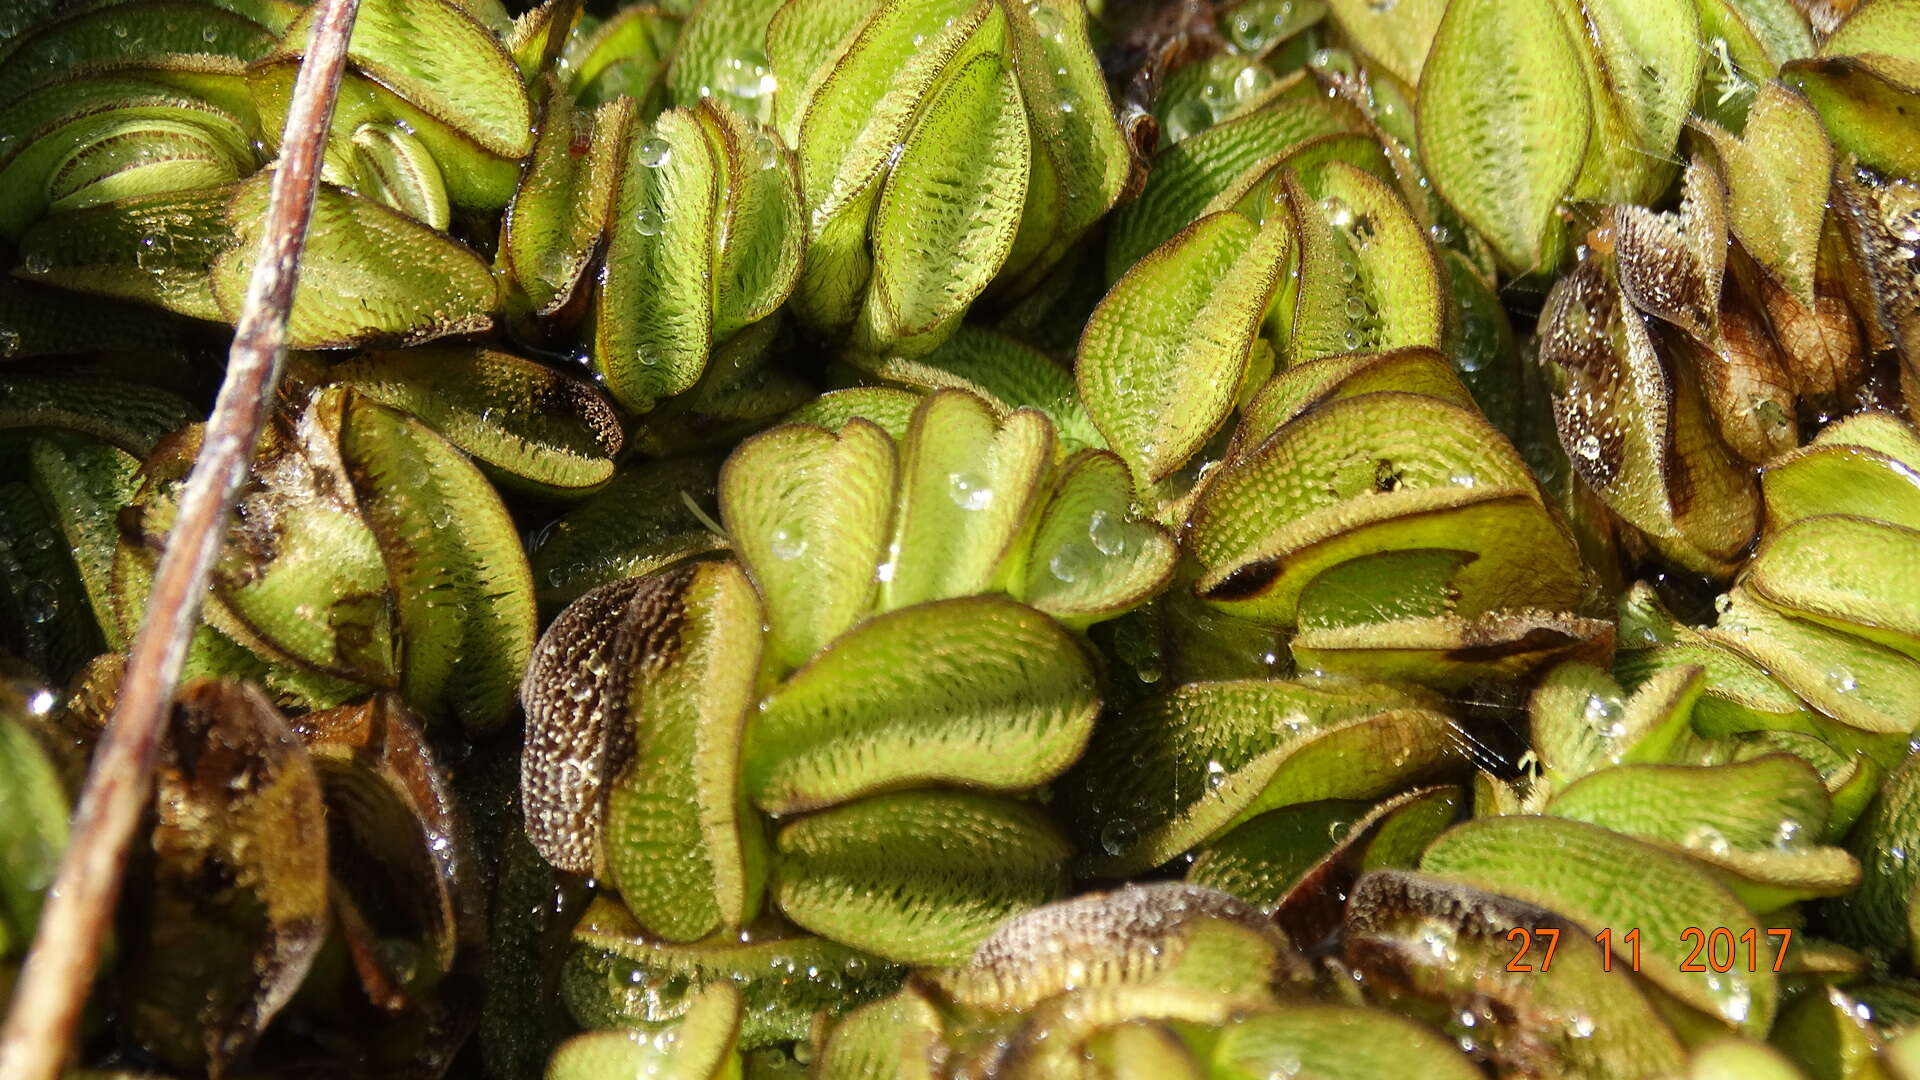 Image of eared watermoss